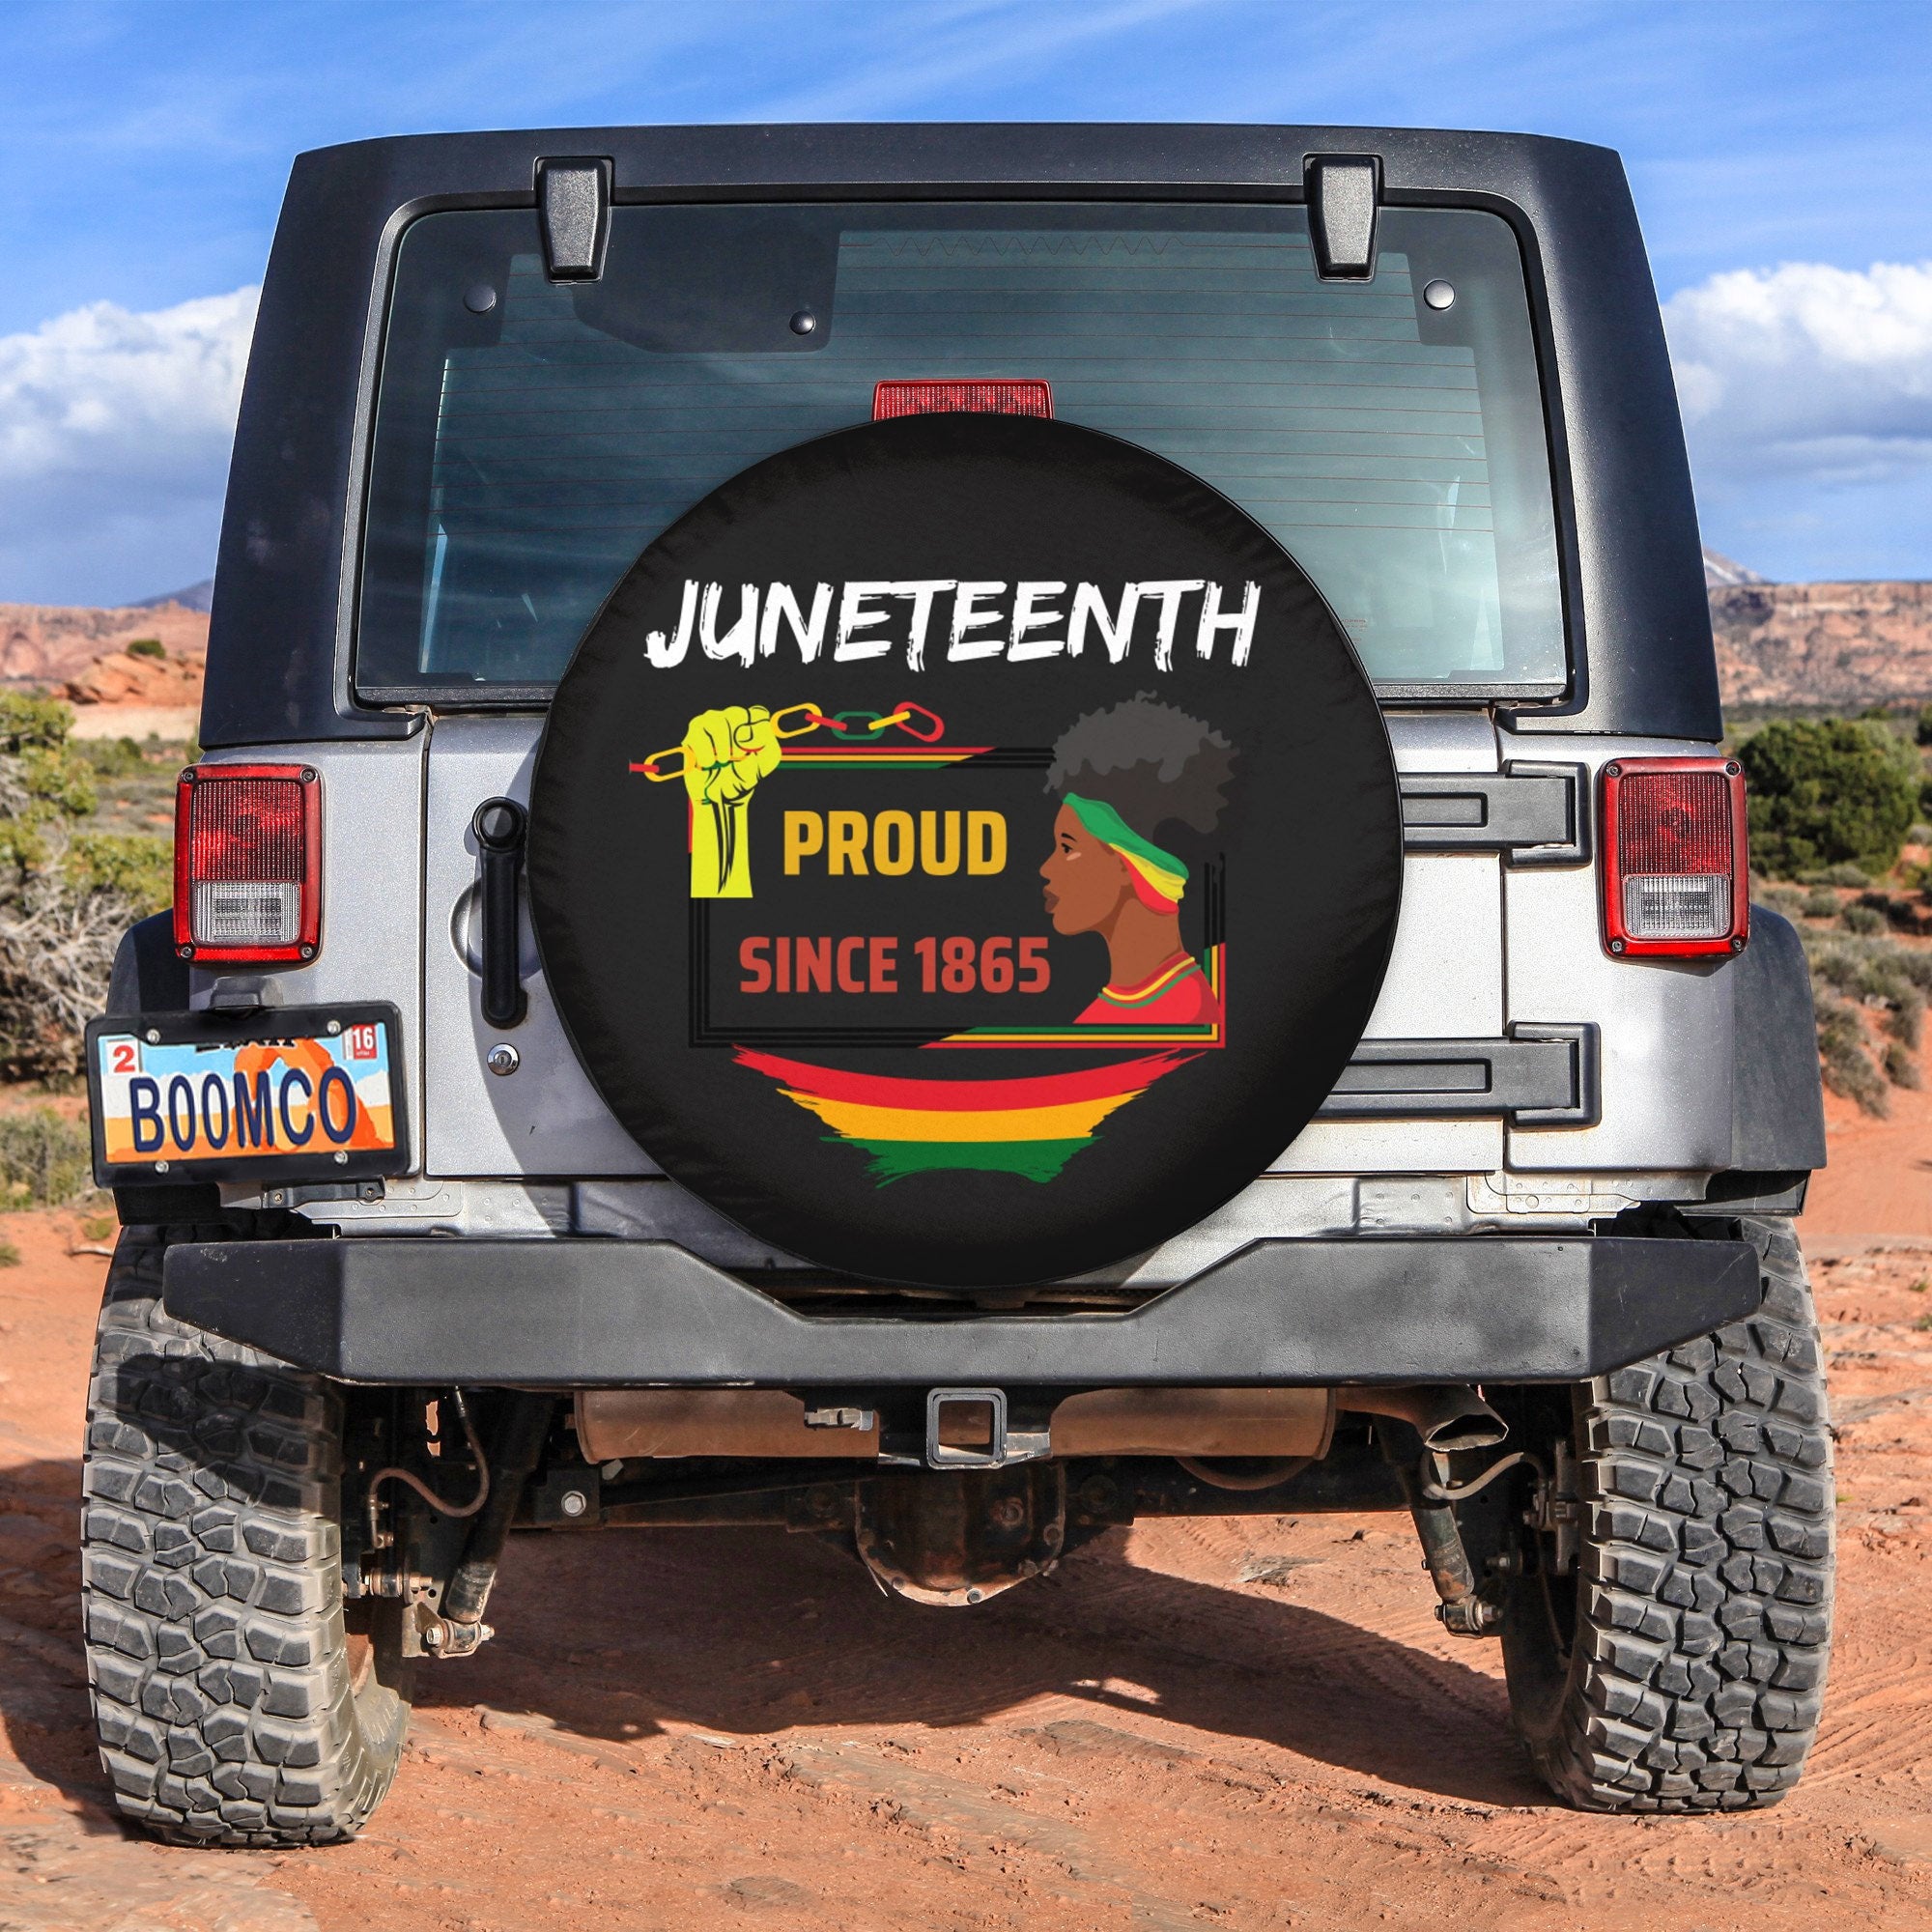 African Tire Covers - Juneteenth Spare Tire Cover Proud Since 1865 NO.176 LT8